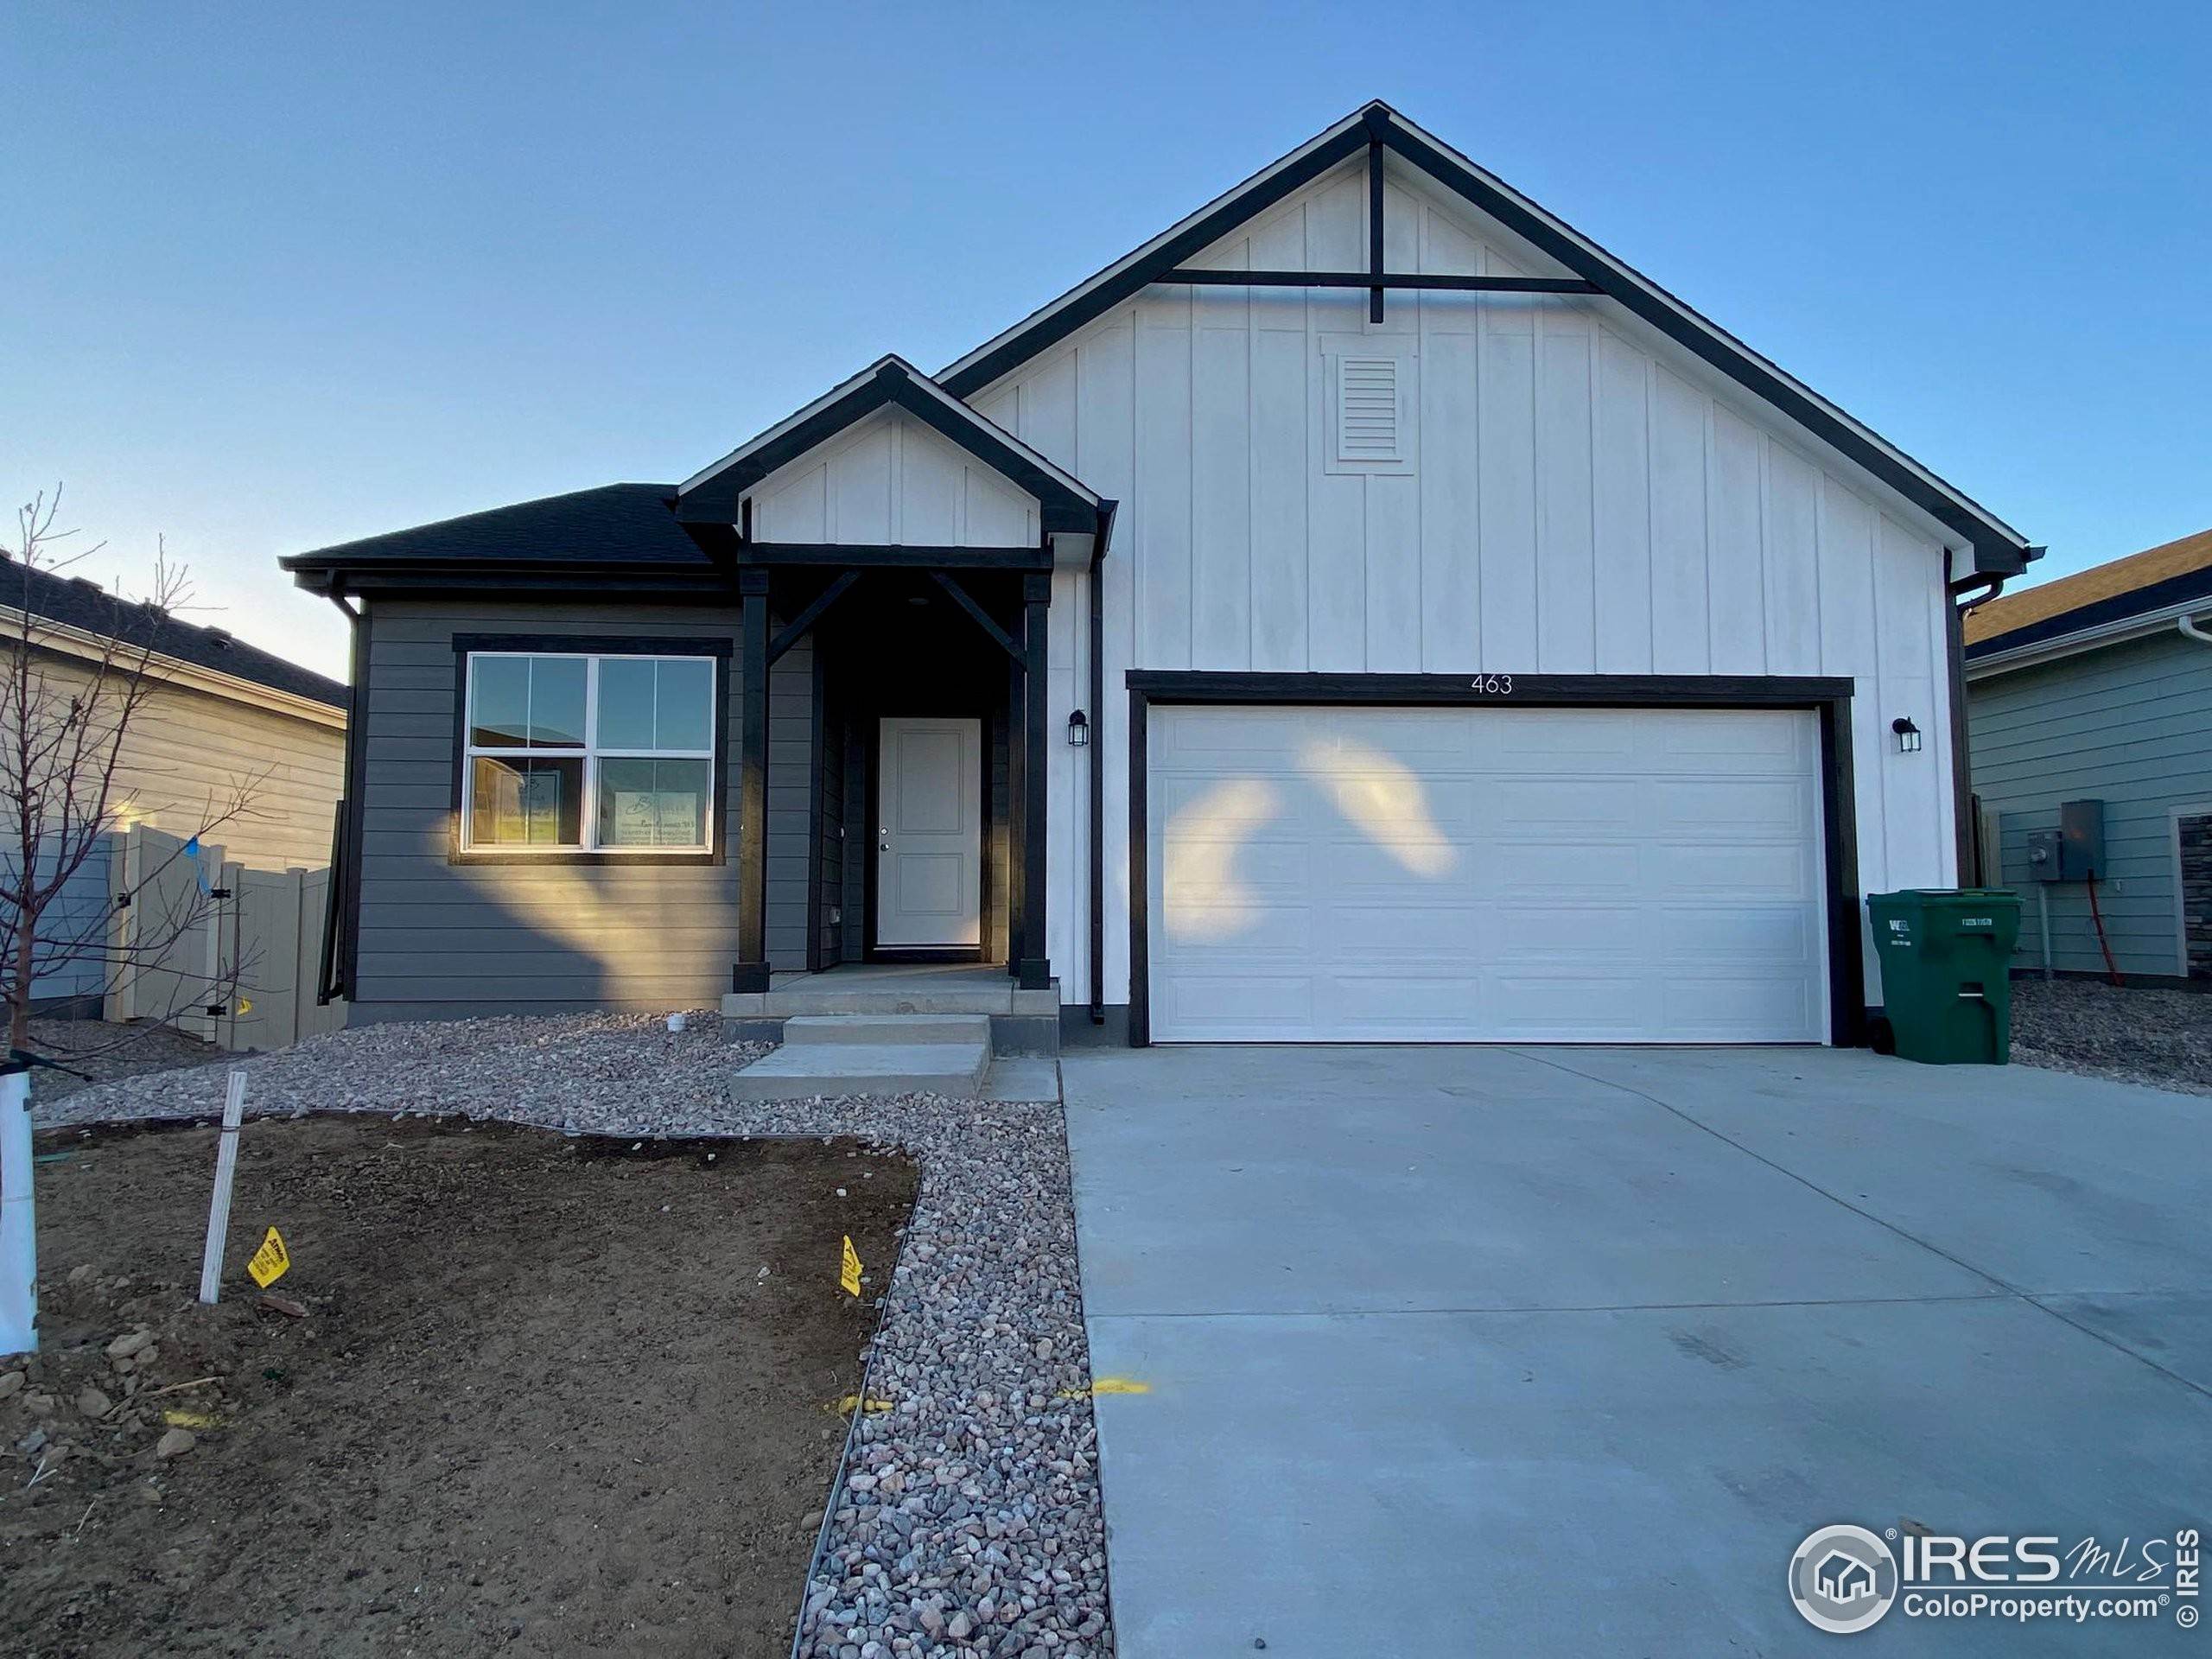 Single Family Homes for Active at 463 Pony Express Trail Ault, Colorado 80610 United States